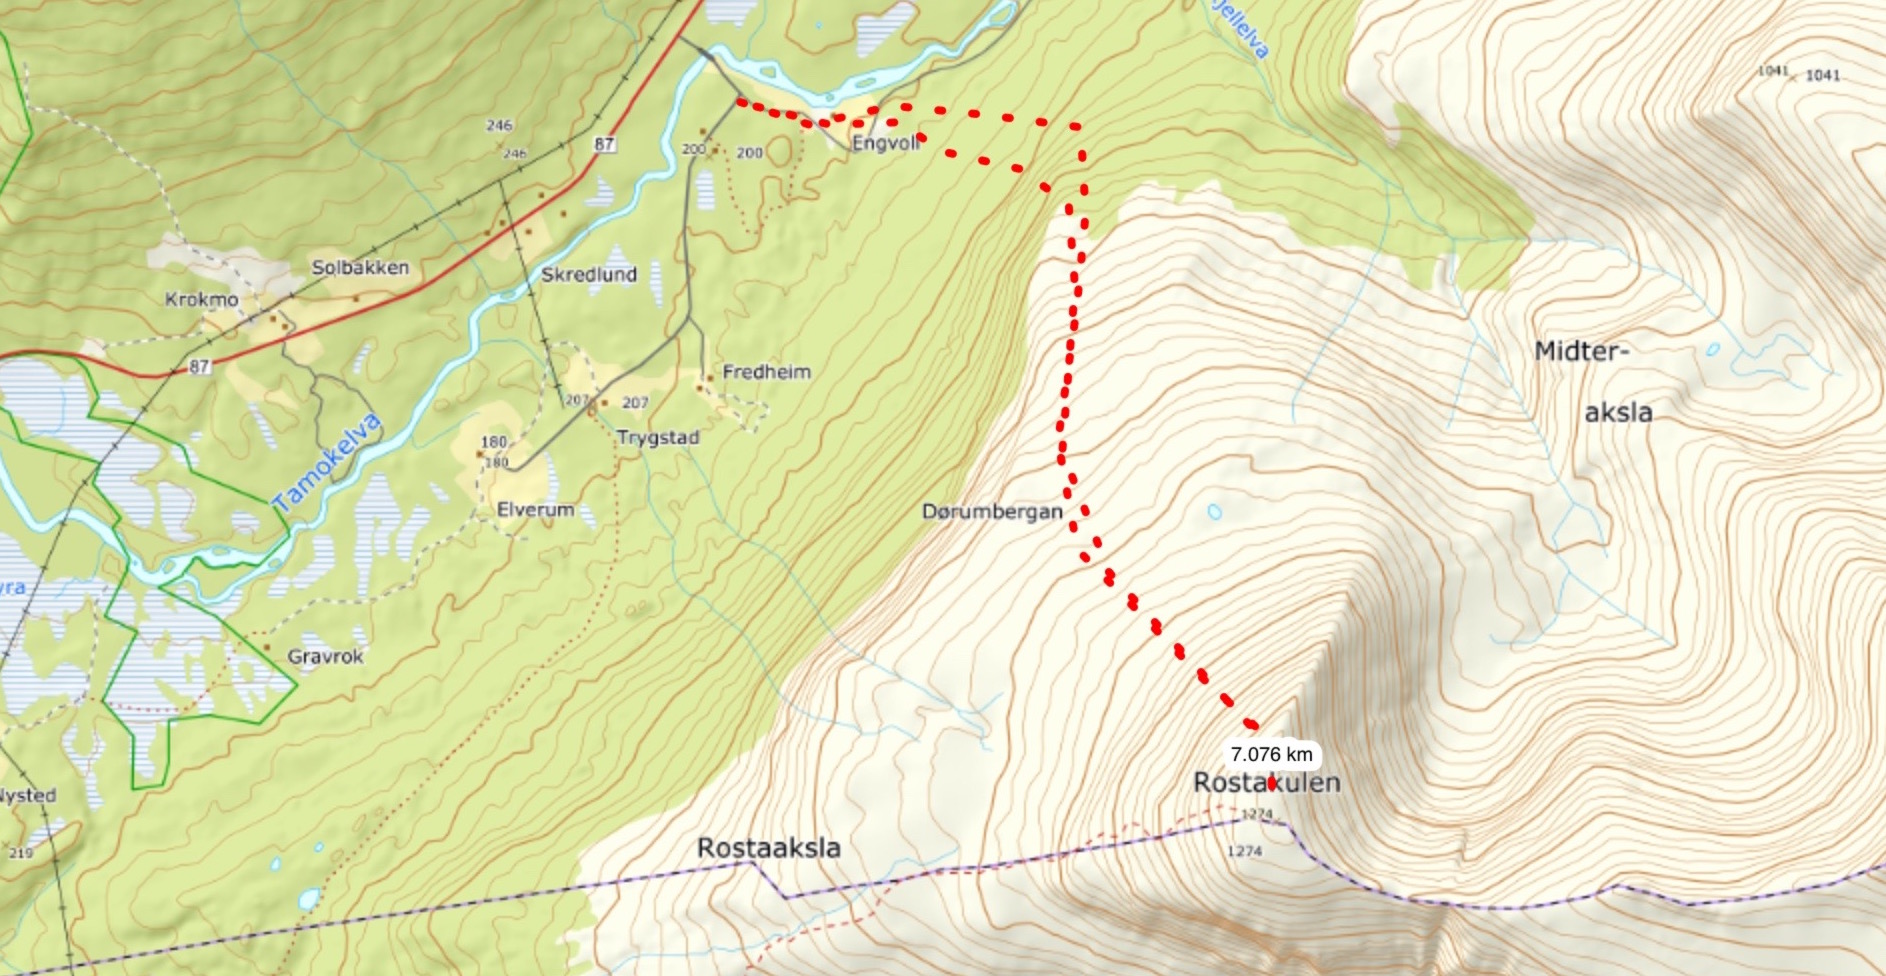 Topographical map of our climbing route up Rostakulen in Tamokdalen